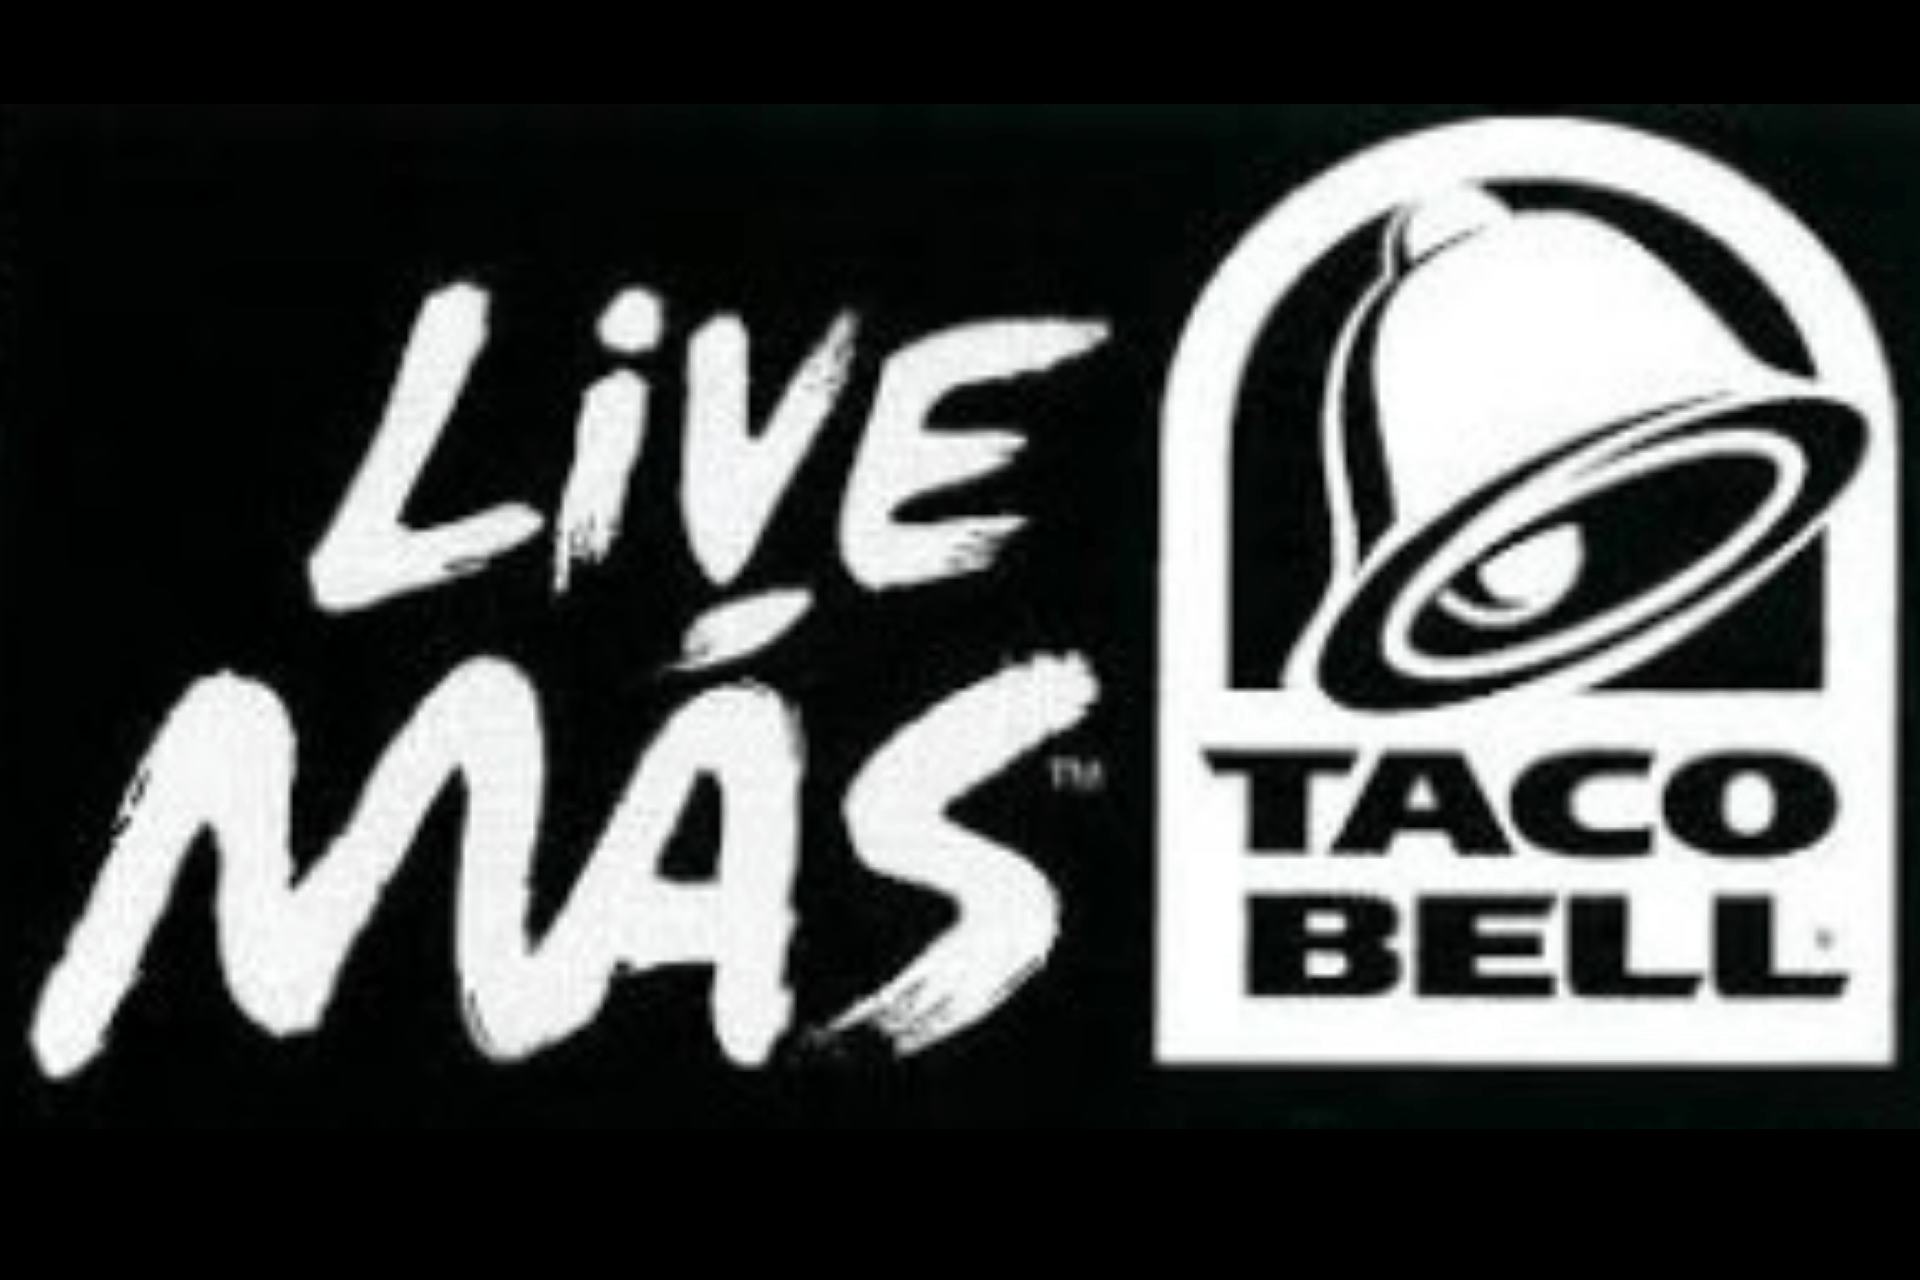 Taco Bell Live Mas Logo - Taco Bell Scholarship Submit Today - CampusLATELY